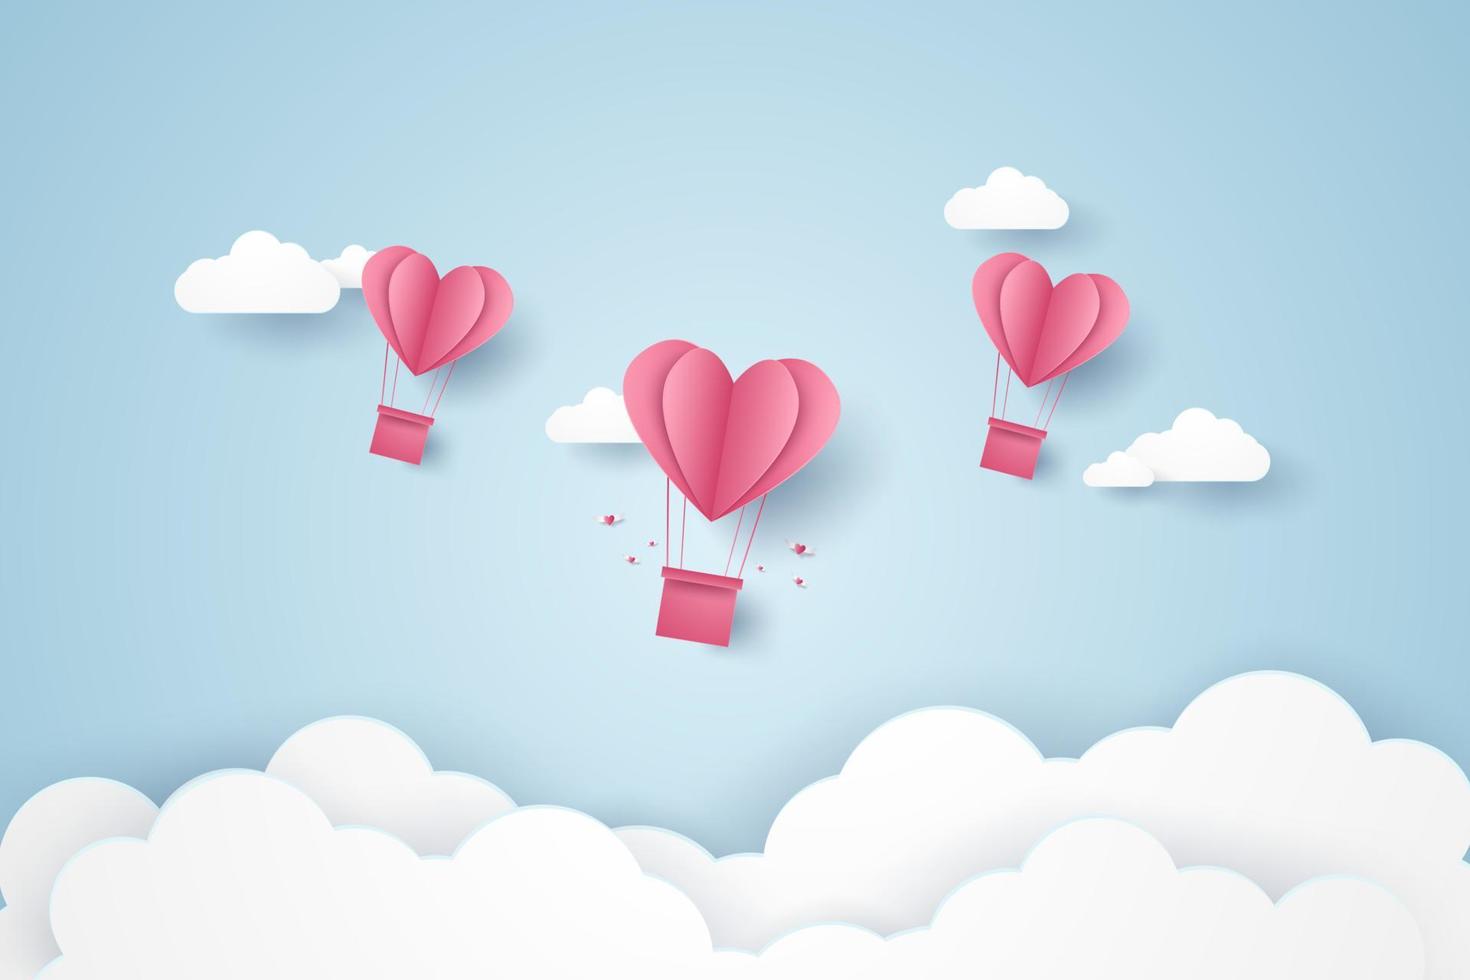 Valentines day, Illustration of love, pink heart hot air balloons flying in the blue sky, paper art style vector